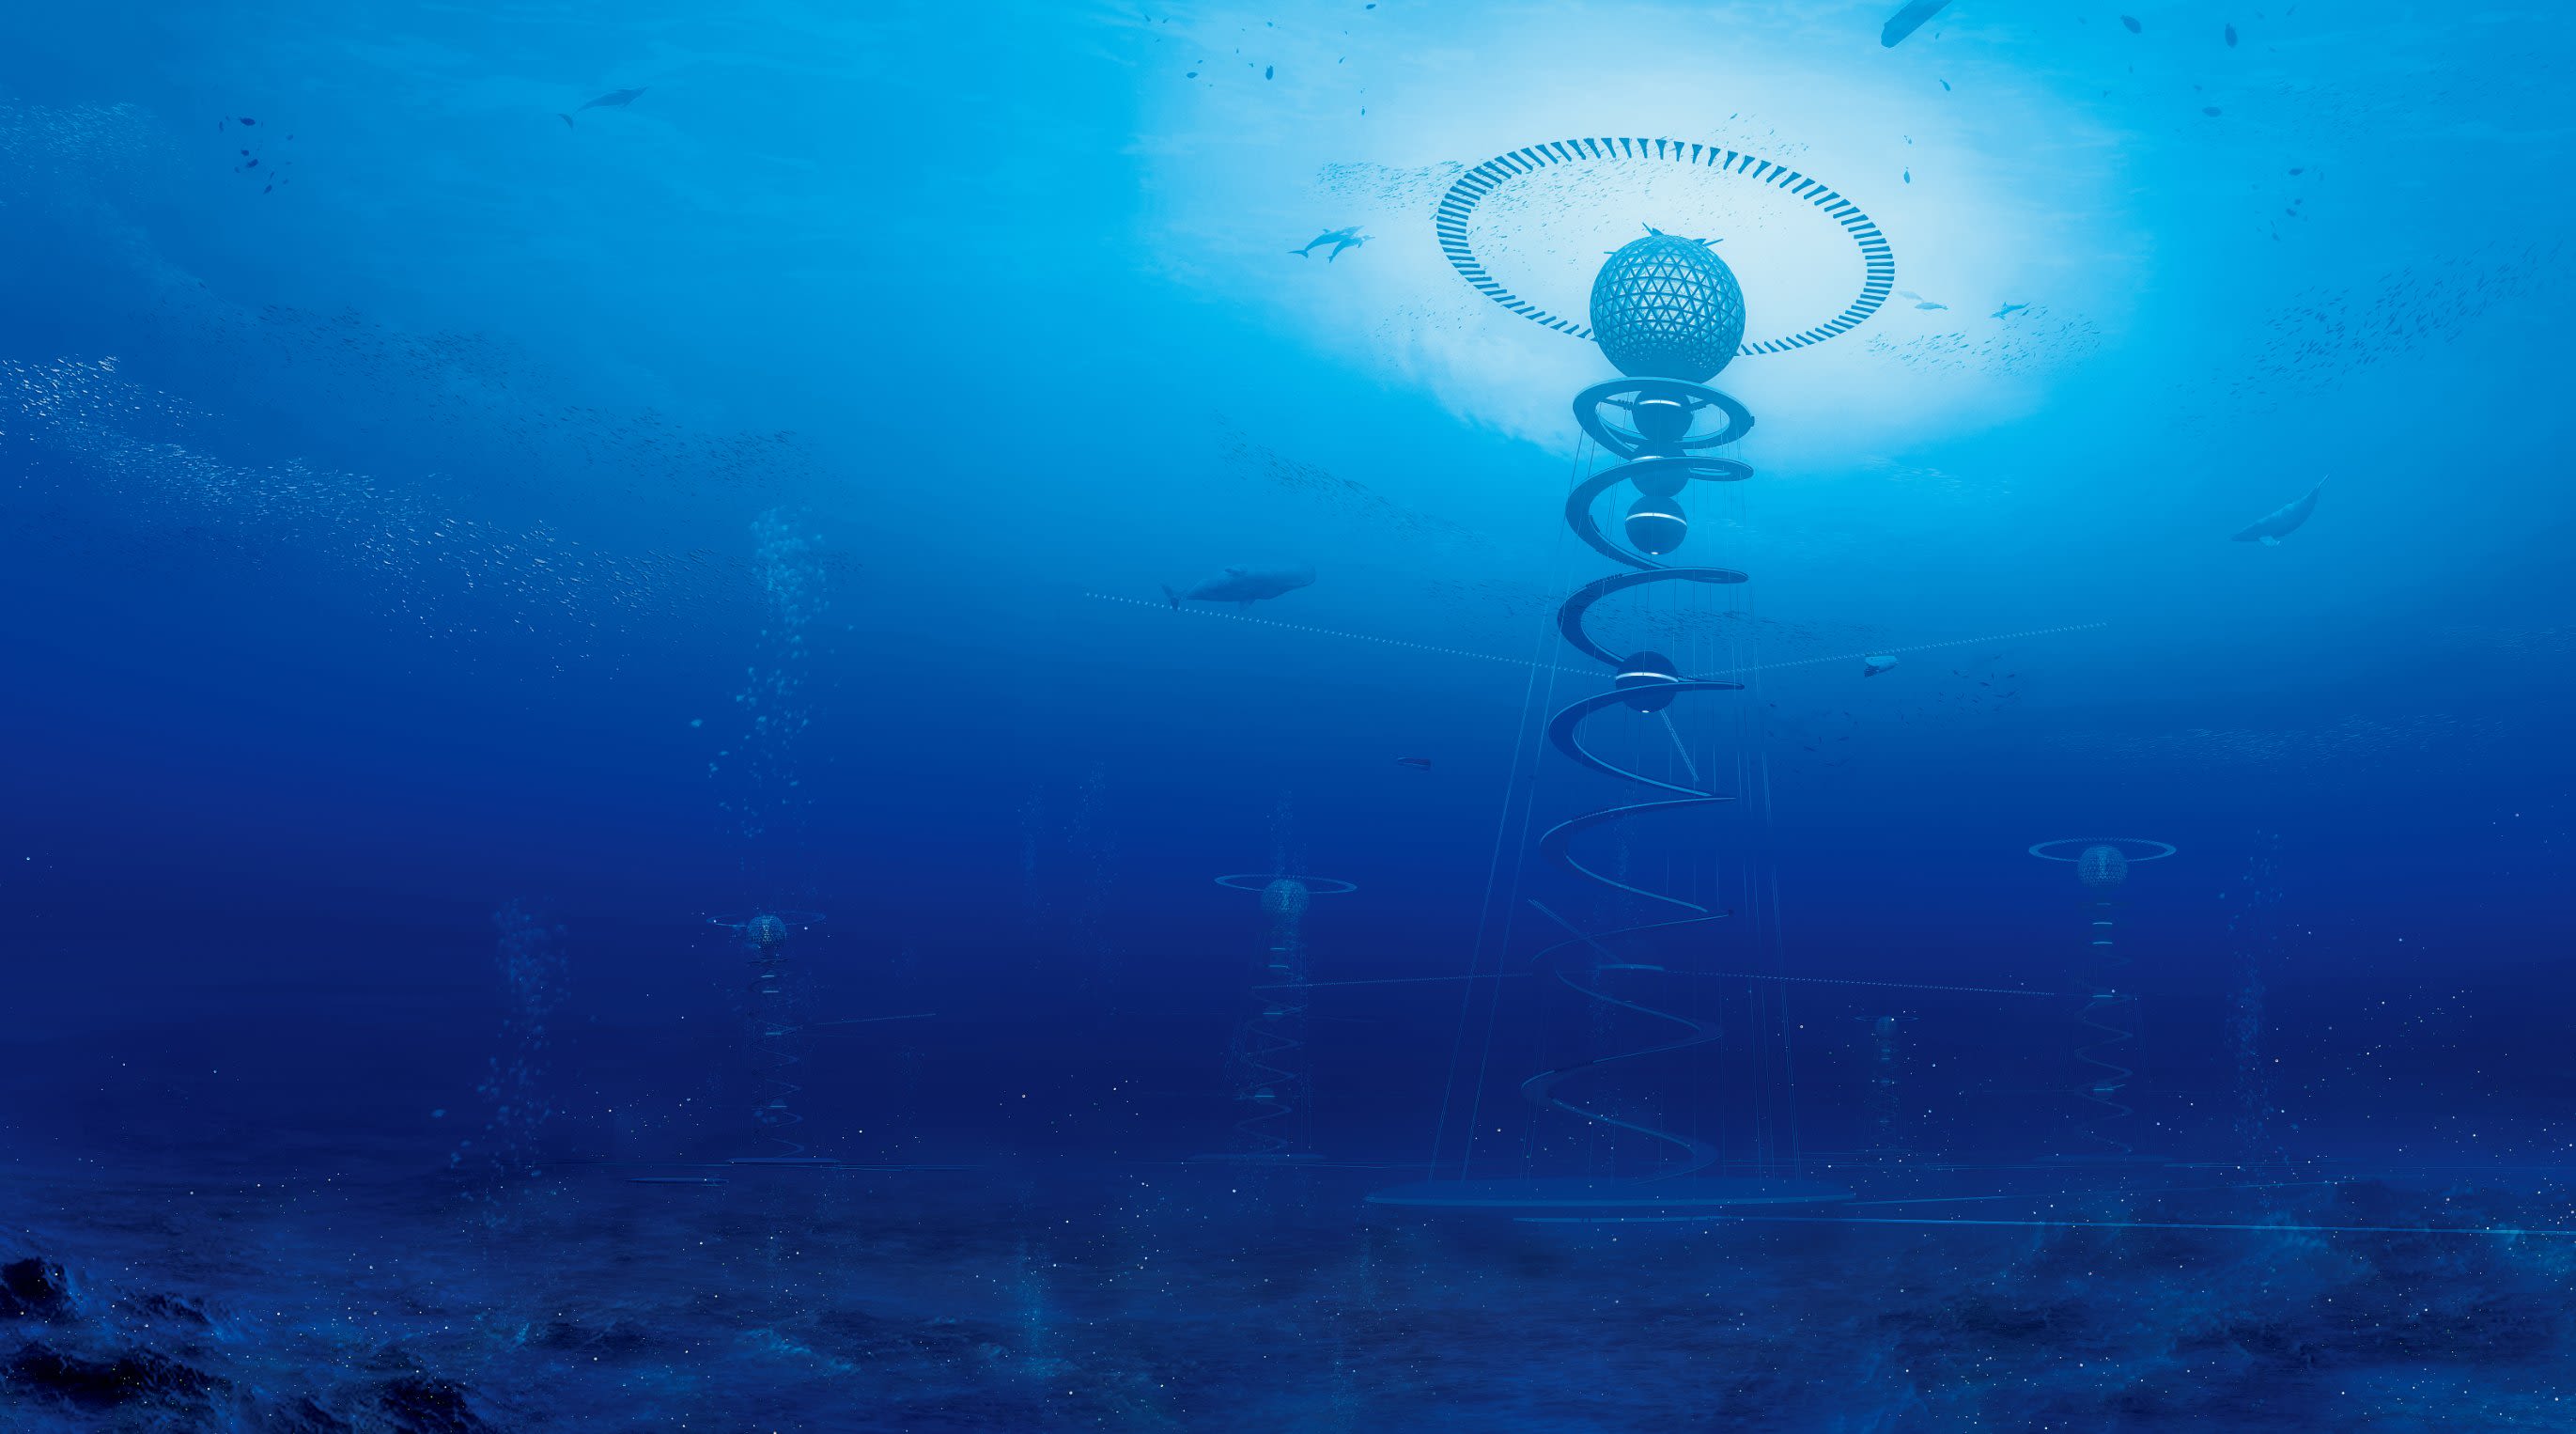 Ocean Spiral is a conceptual city proposed beneath the surface of the ocean  